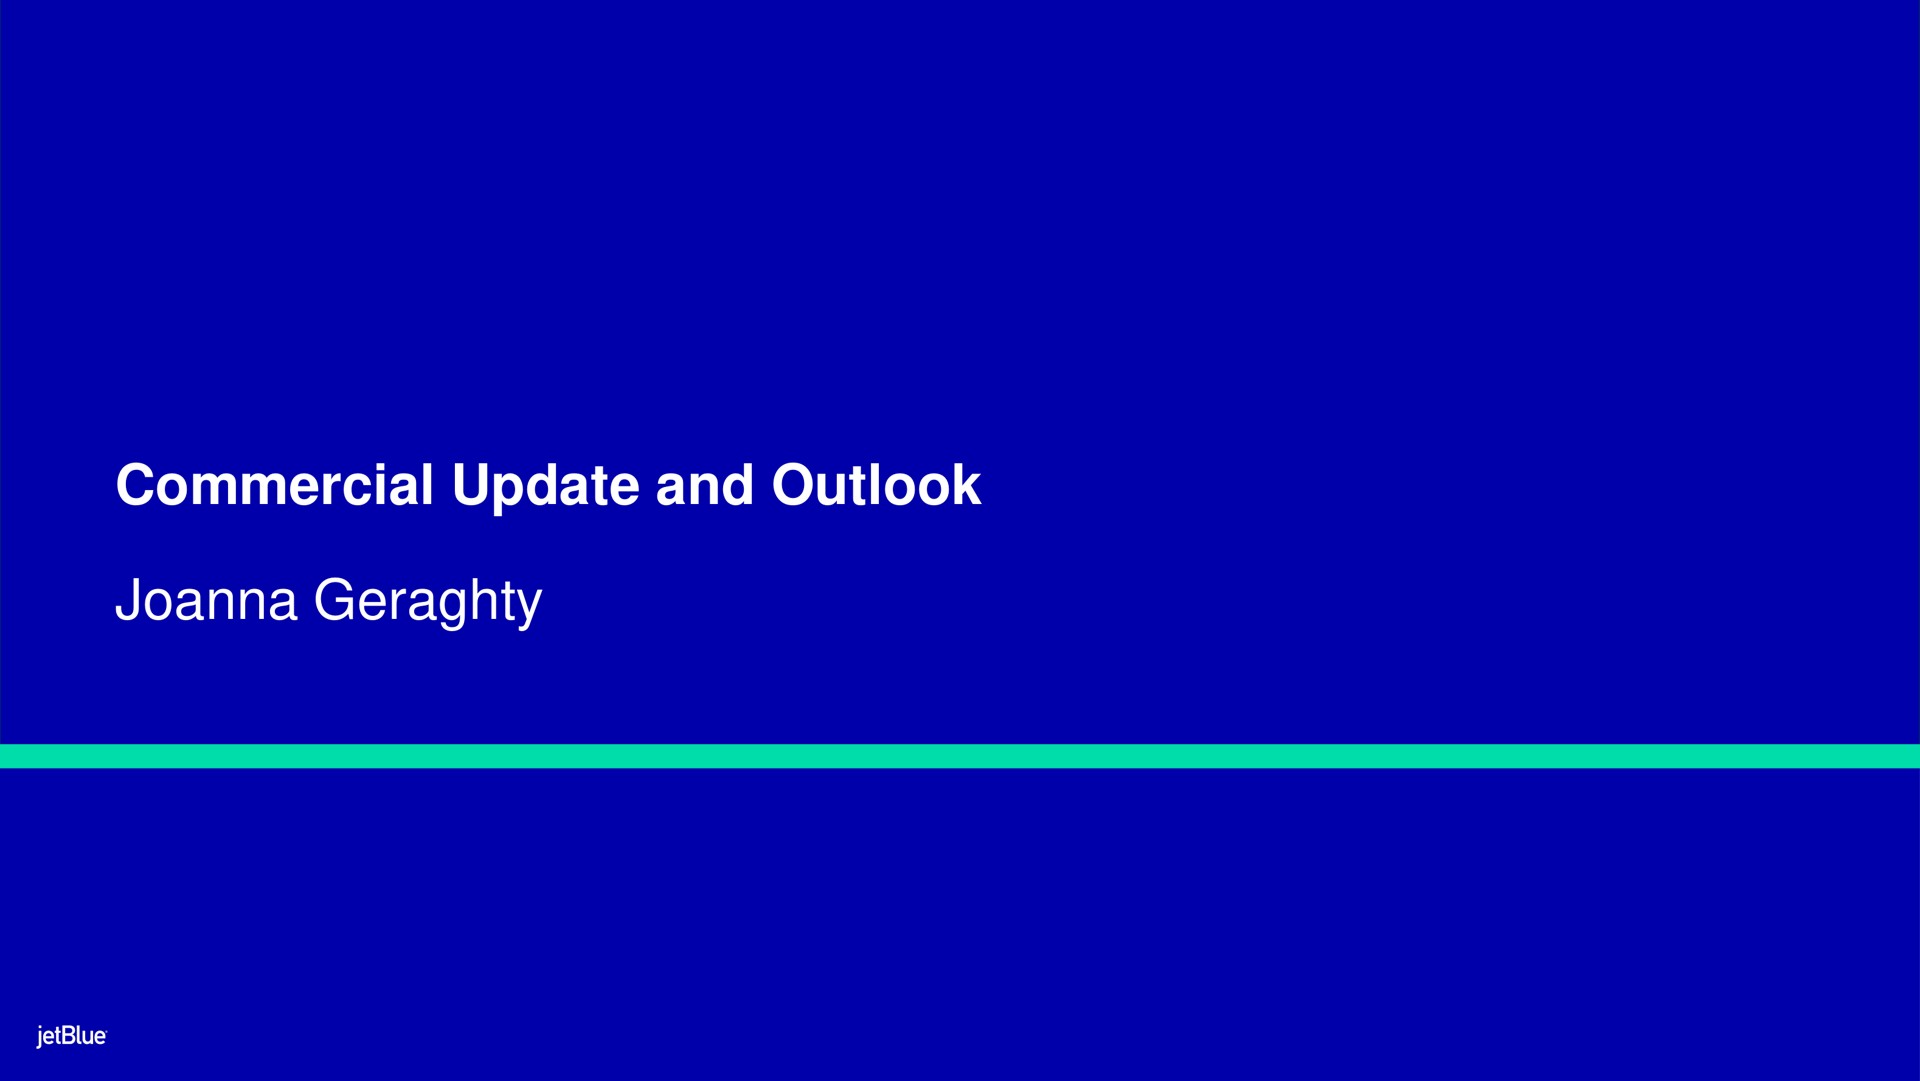 commercial update and outlook | jetBlue